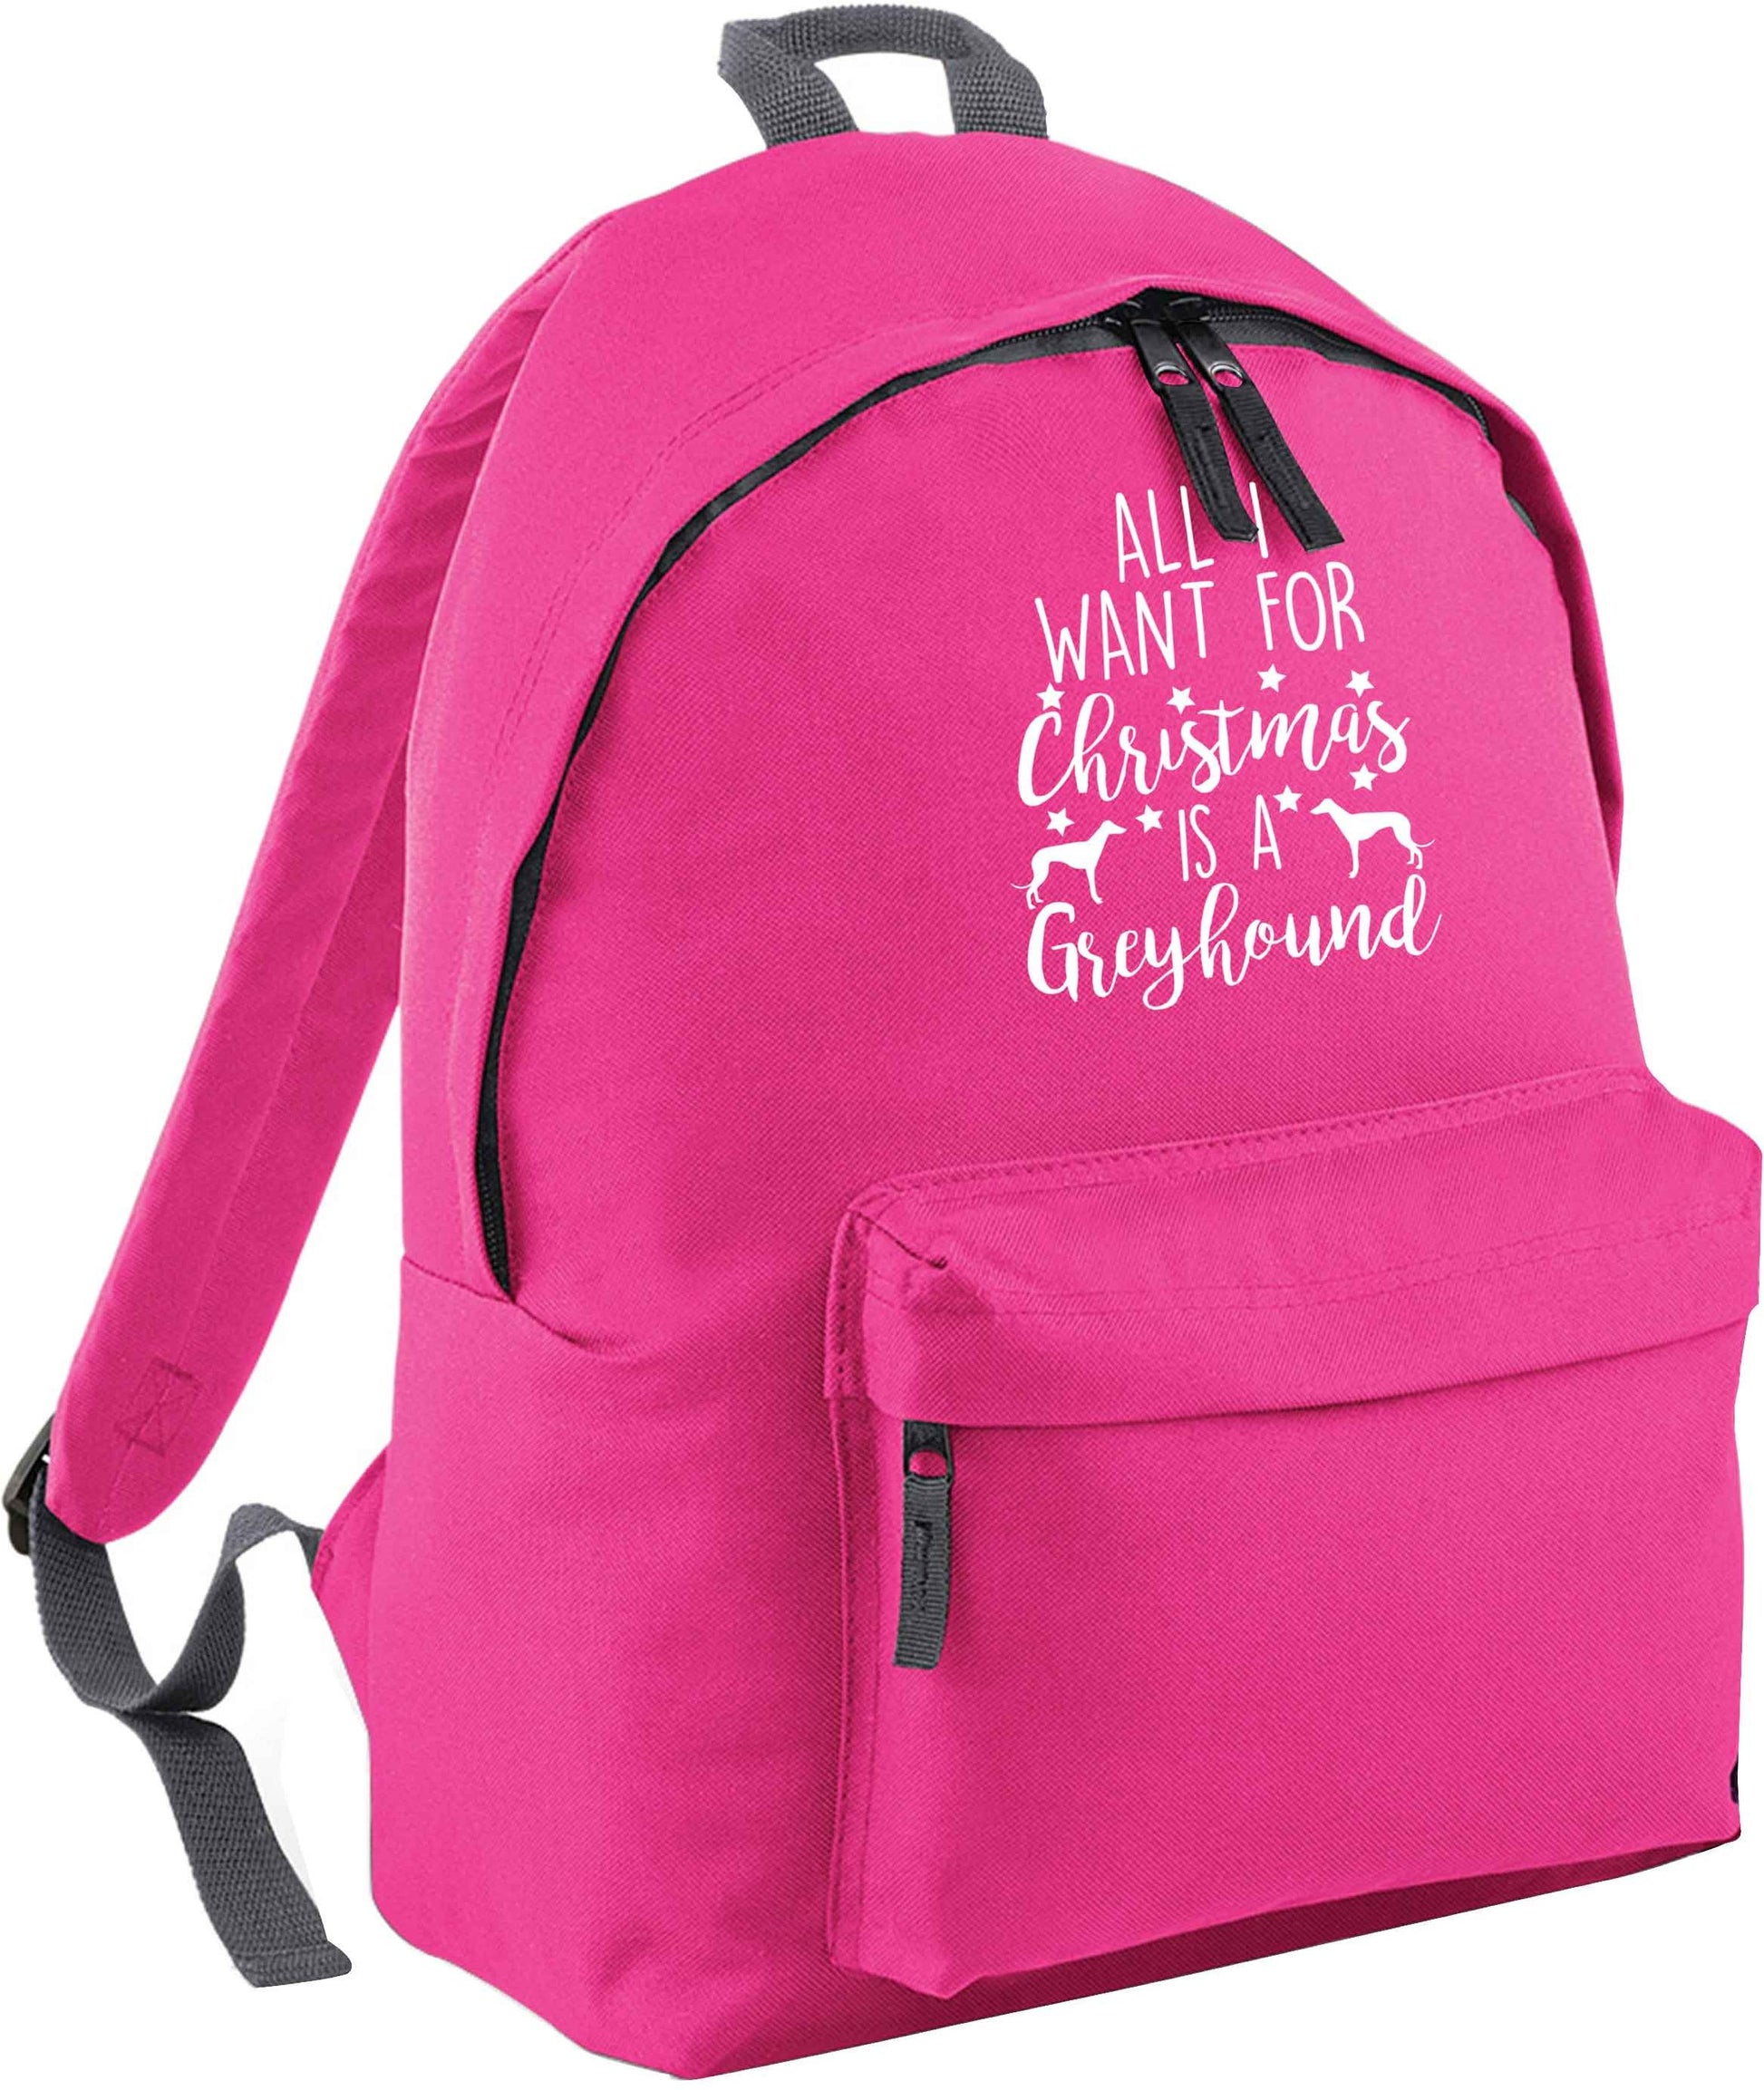 All I want for Christmas is a greyhound pink adults backpack